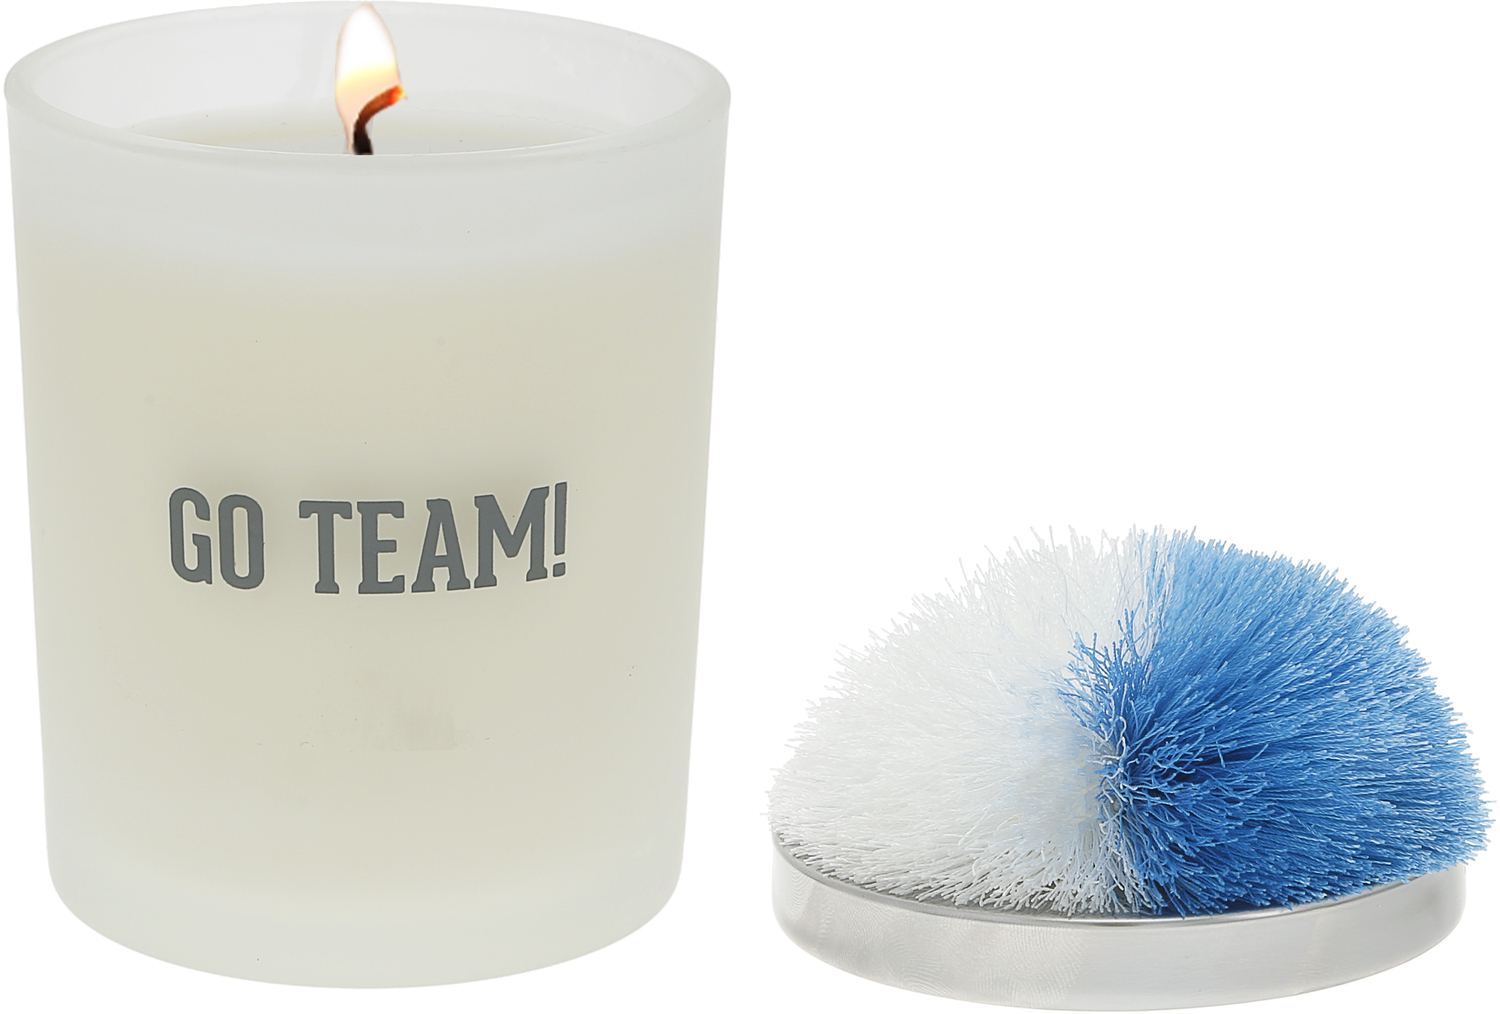 Go Team! - Light Blue & White by Repre-Scent - Go Team! - Light Blue & White - 5.5 oz - 100% Soy Wax Candle with Pom Pom Lid
Scent: Tranquility